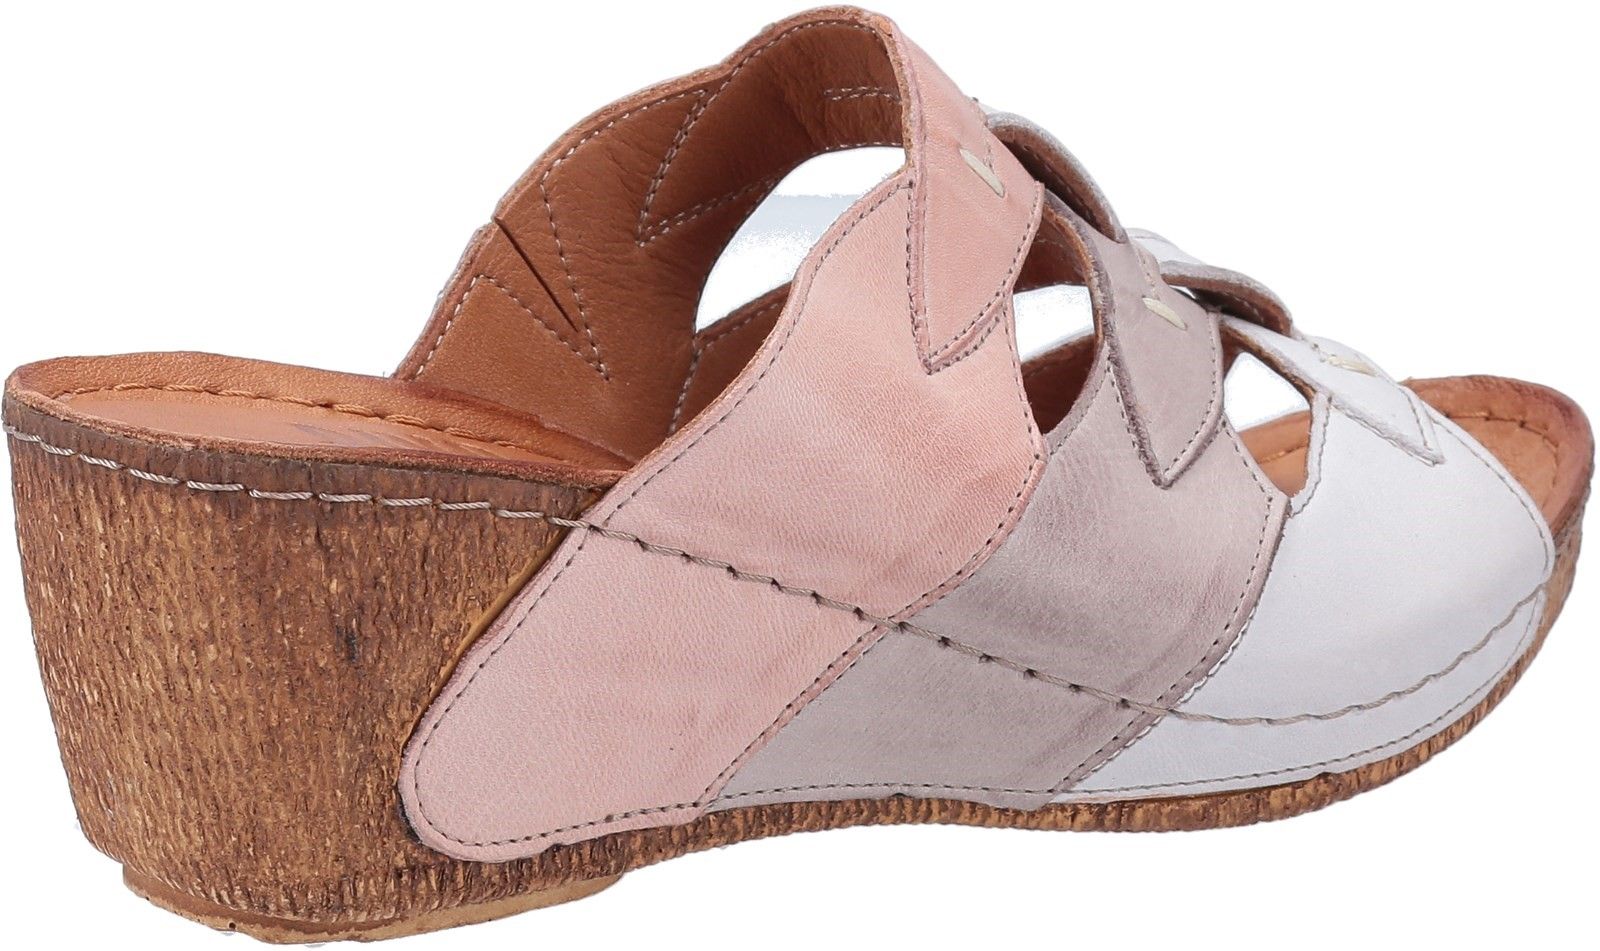 Riva Reus is a womens stylish and lightweight wedge heeled open toe mule sandal featuring tonal coloured leather uppers with cut-out detailing and bark effect textured wedge.